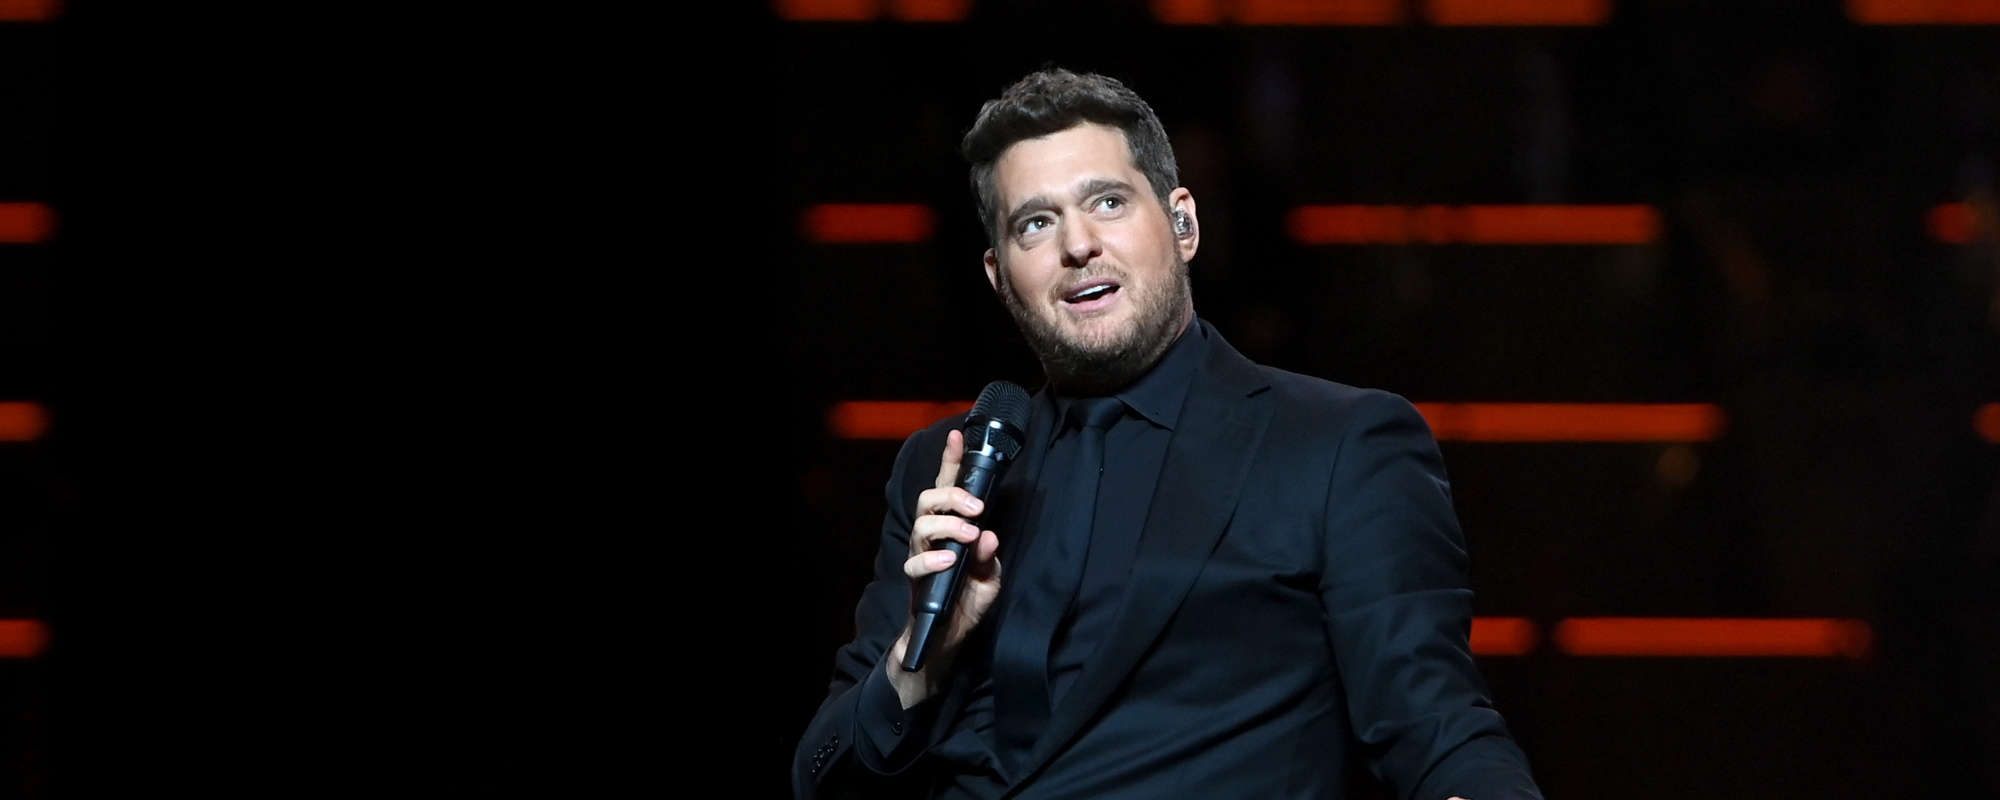 Michael Bublé Recalls Nearly Being “A Little Polar Bear Lunch” in Scary Vacation Encounter